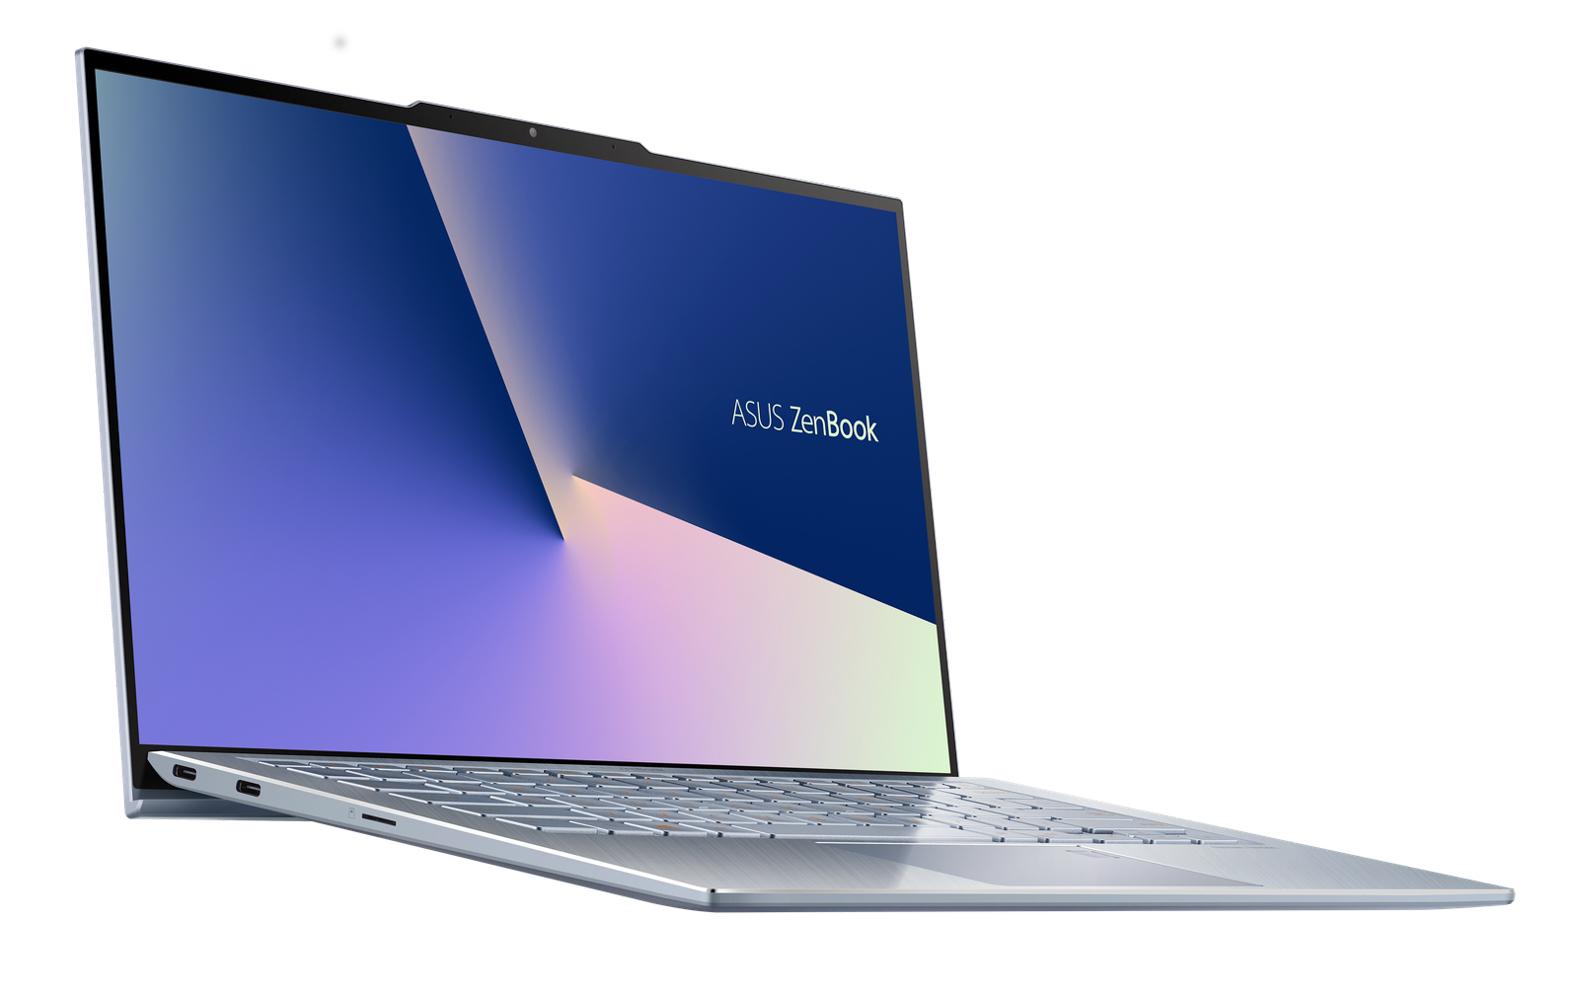 ASUS_ZenBook_S13_UX392_powerful_performance_with_discrete_graphics.jpg